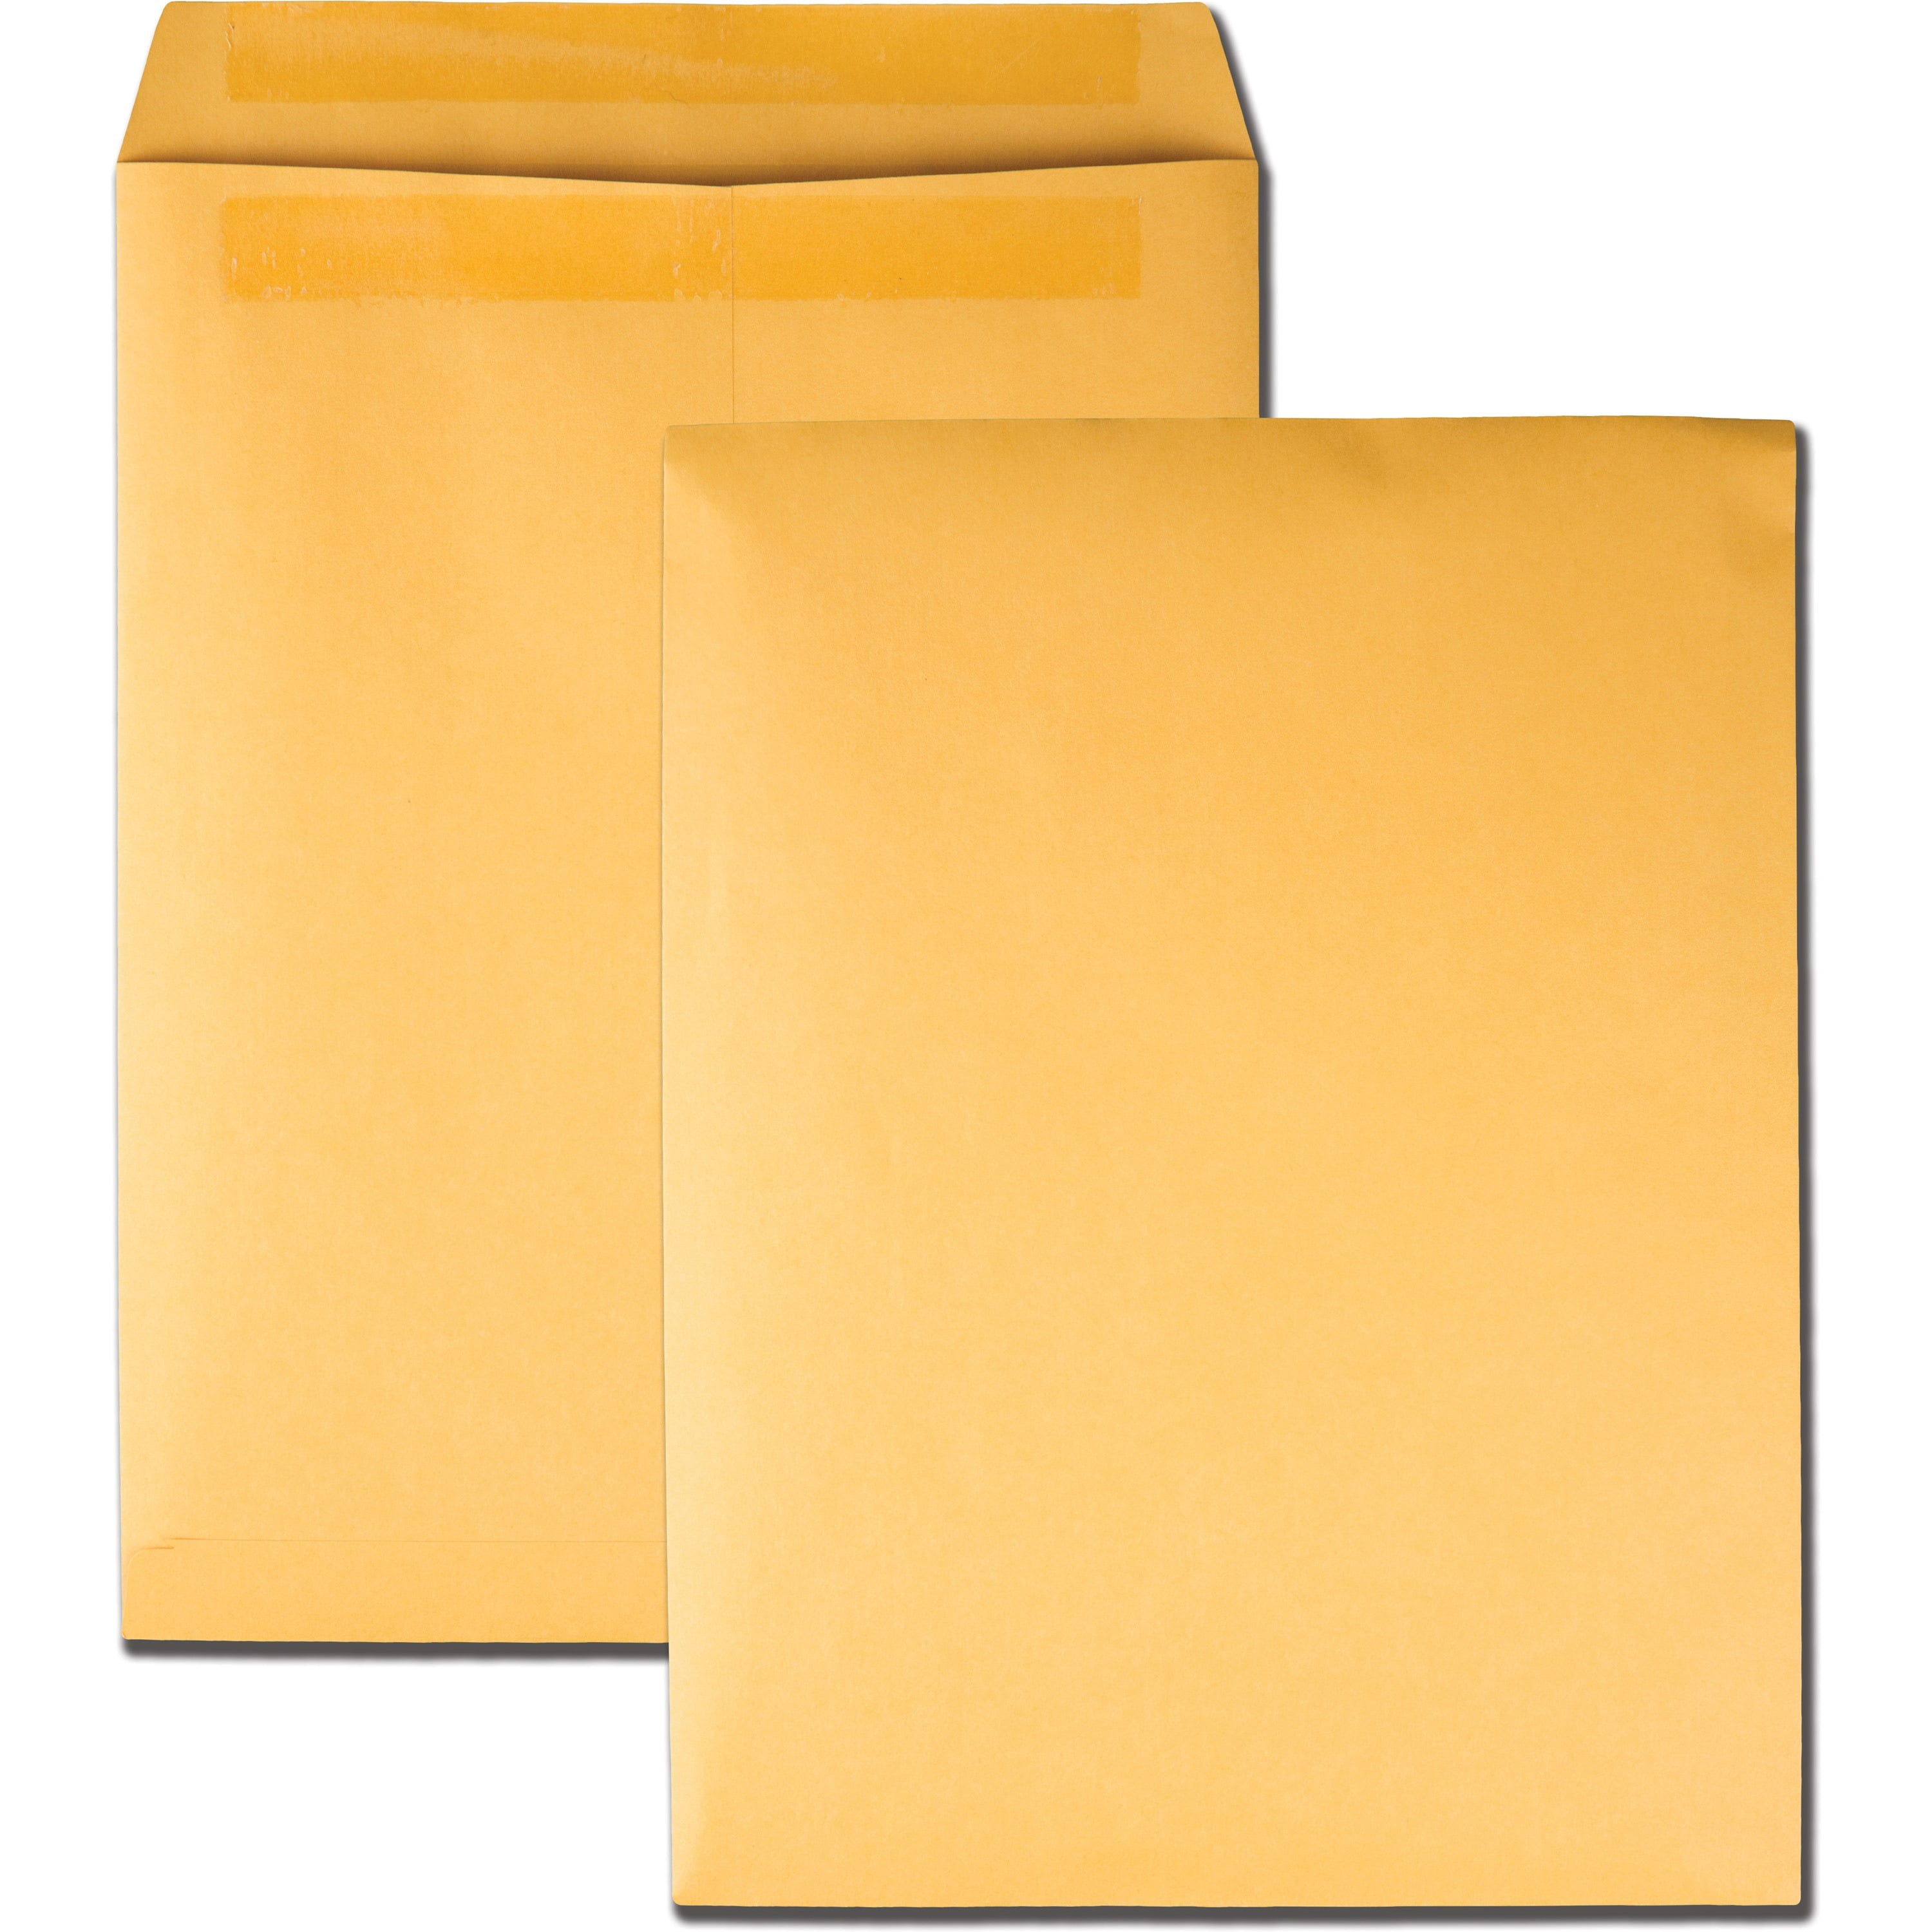 Quality Park Clasp Envelopes Red 50 Envelopes 9 x 12 inches 5-Pack Details about   New